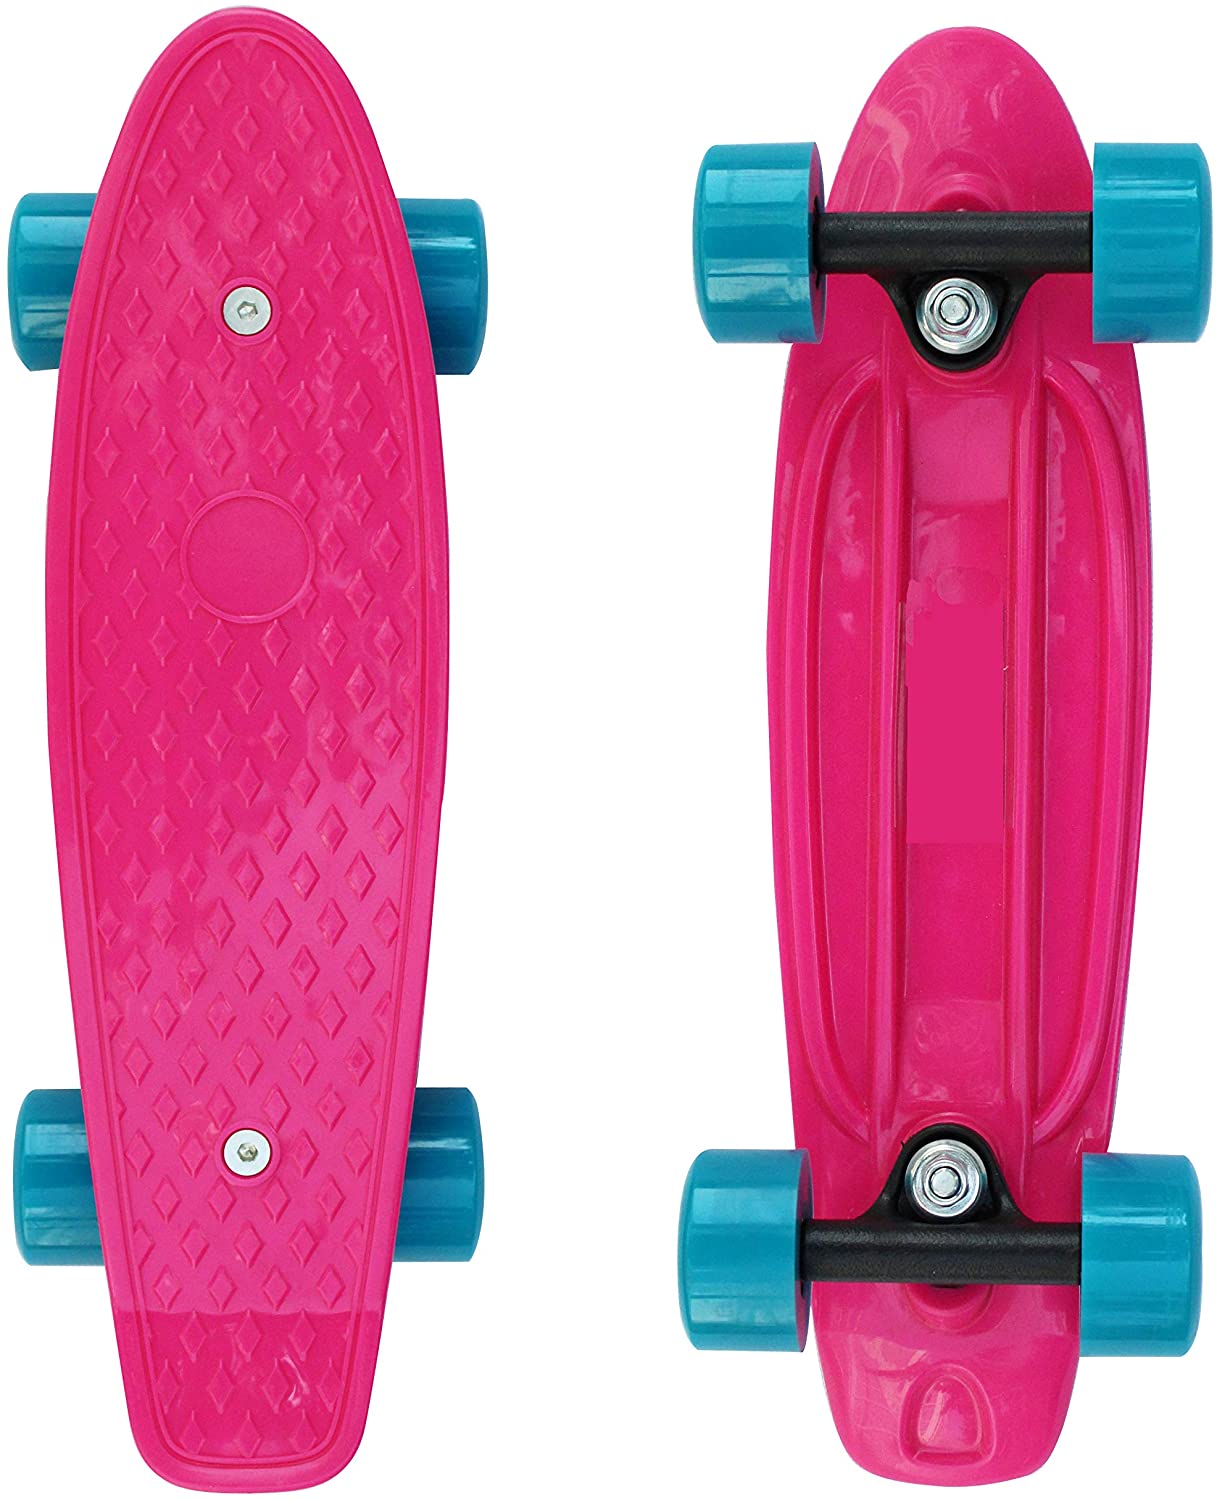 23.2 Inches Plastic Mini Classic Skateboard,with Bendable Deck and Smooth Soft PU Wheels Cruiser Board for Kids Boys Girls Youth Beginners OLEIO Complete Skateboard 